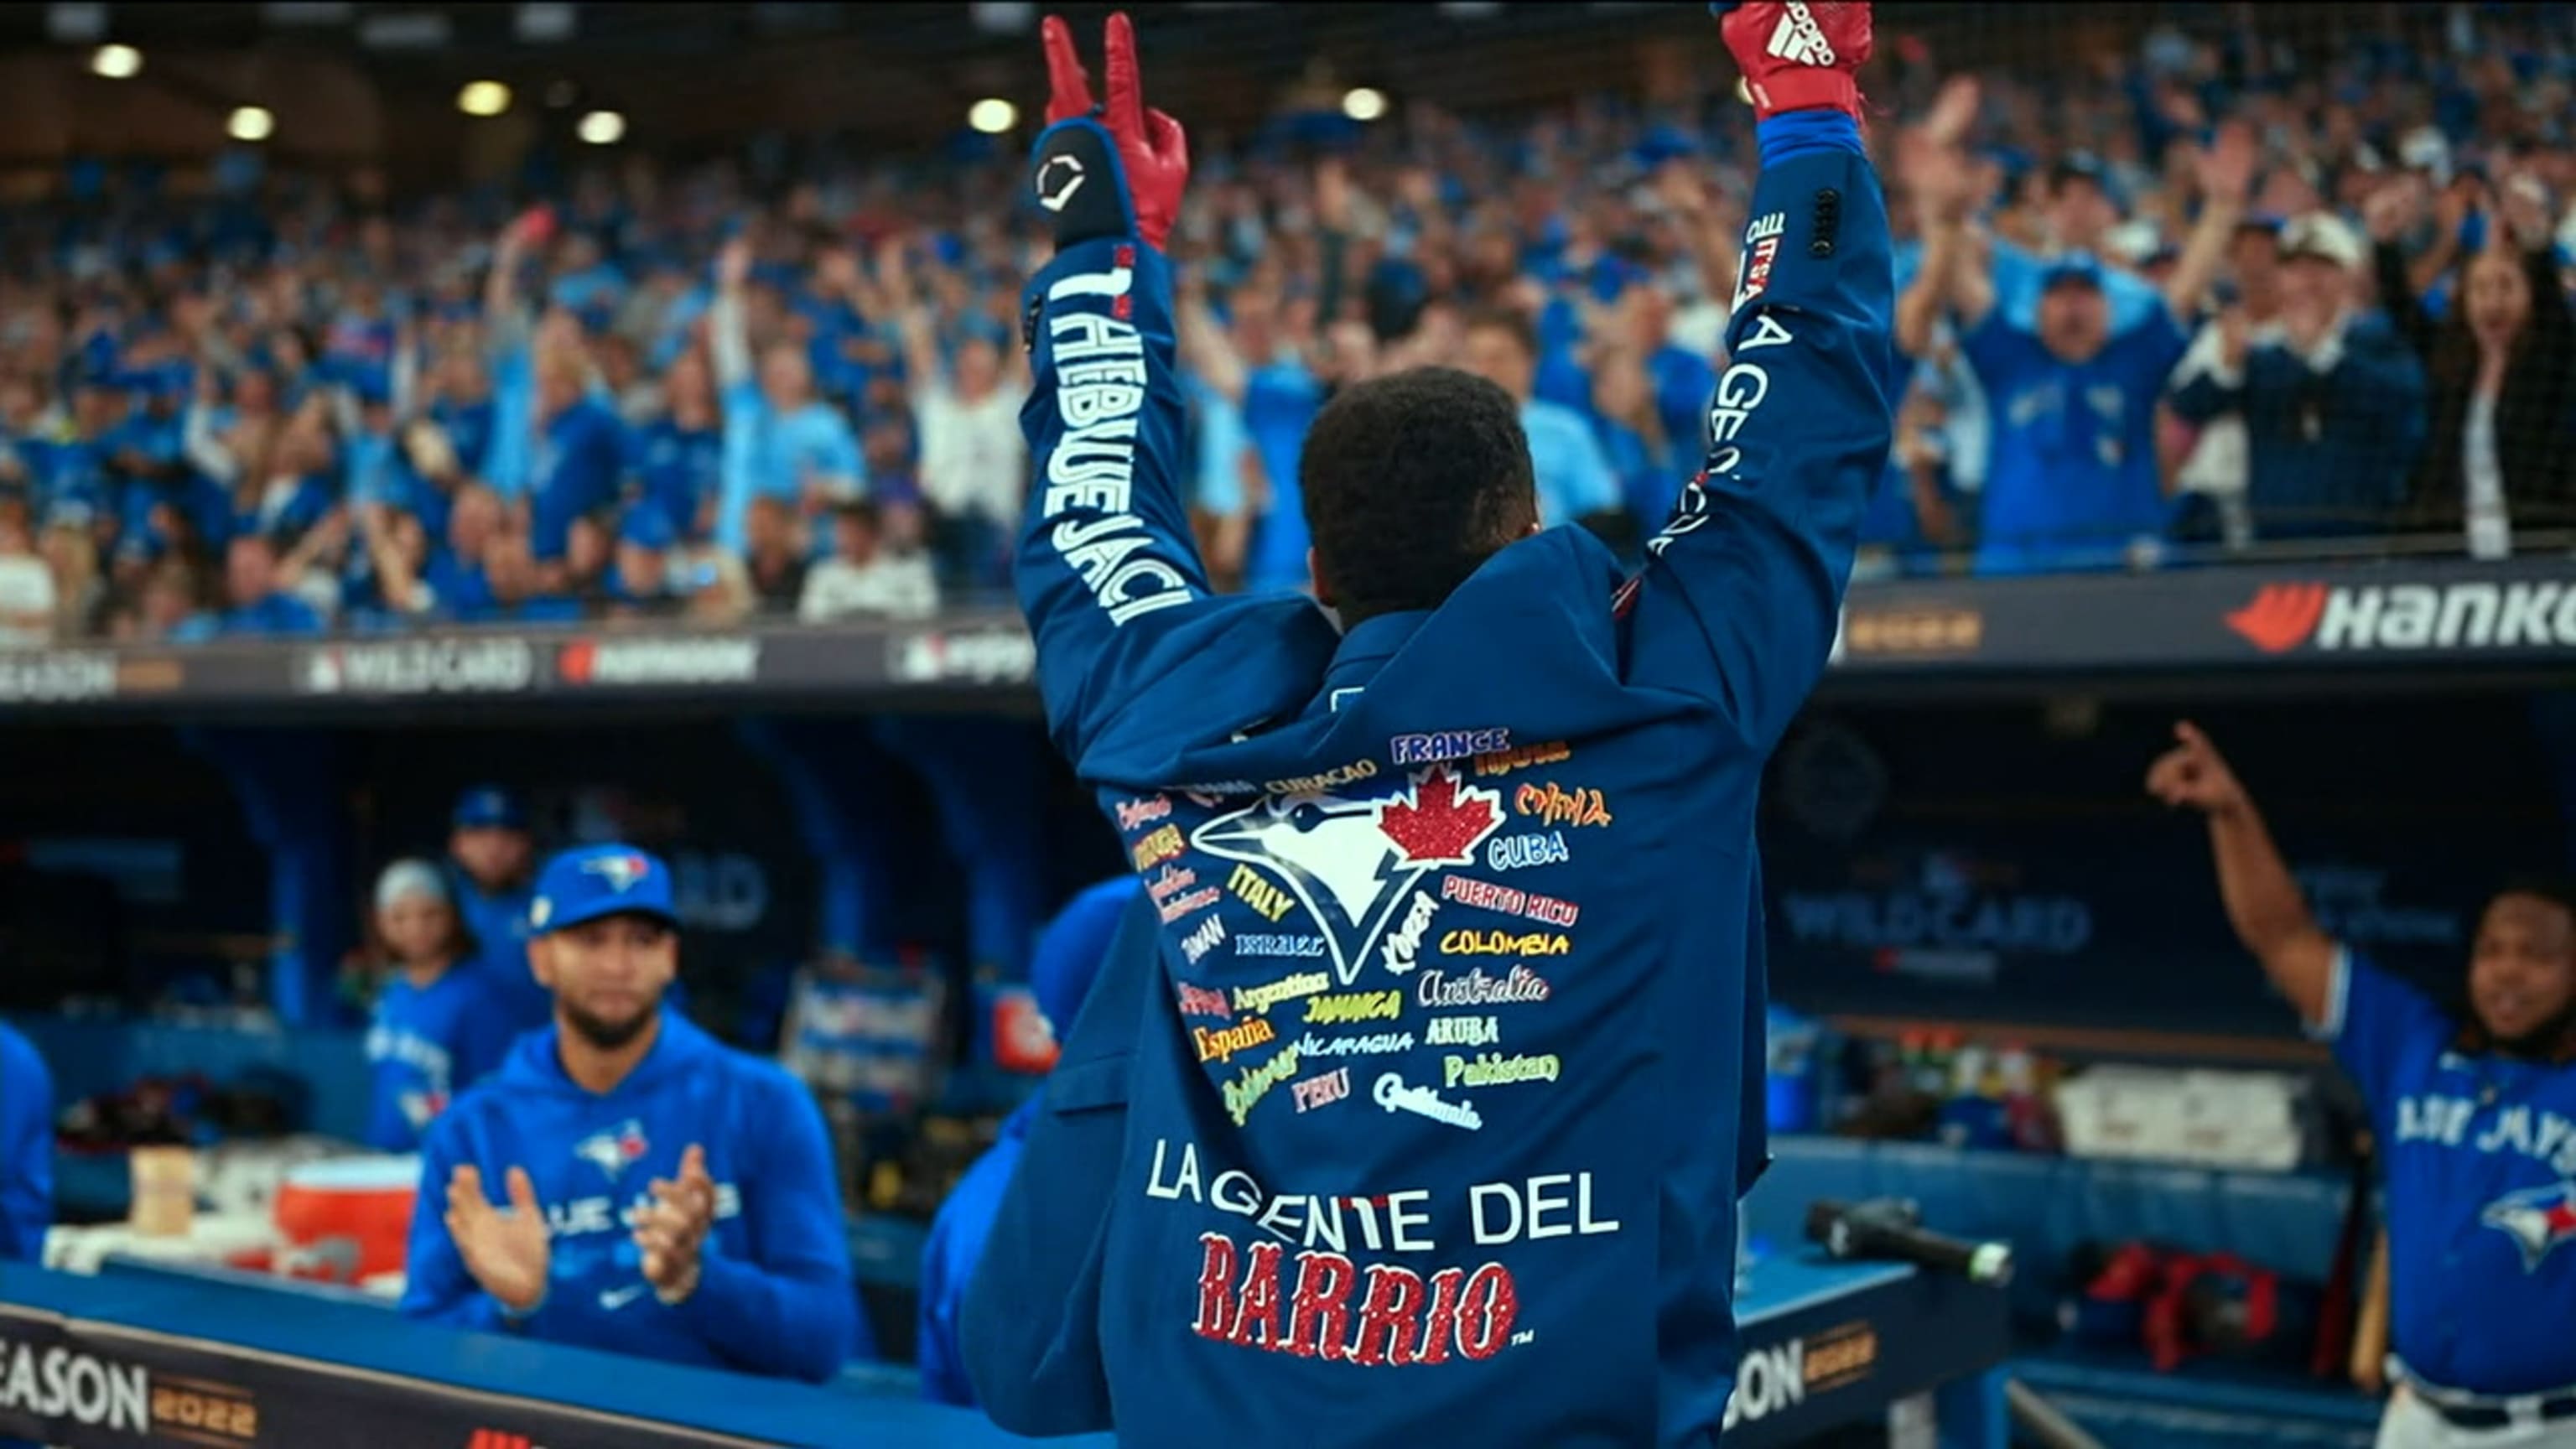 Mariners fans react to team store selling Blue Jays merch: If this is